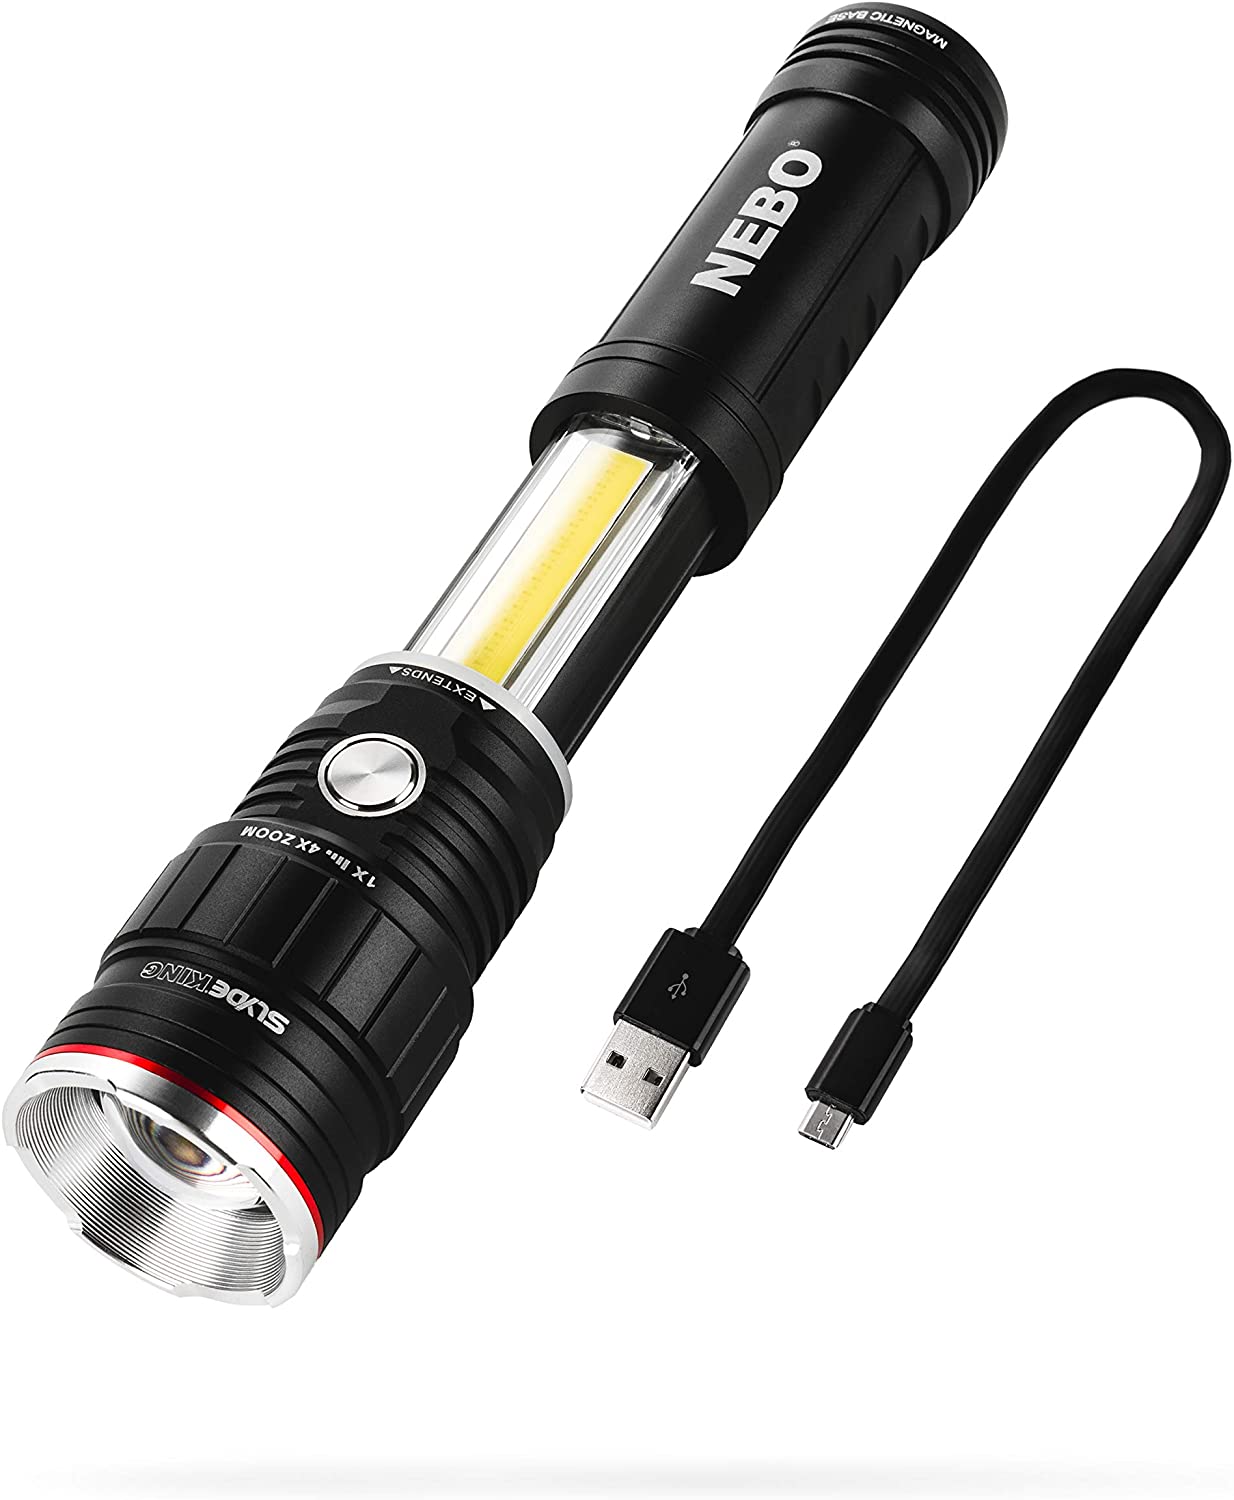 NEBO Slyde King Flashlight, Rechargeable LED Flashlight and Work Light, Bright, Durable, Everday Carry & Camping Flashlight with 4 Light Modes, C.O.B. Work Light and Magnetic Base - image 1 of 7